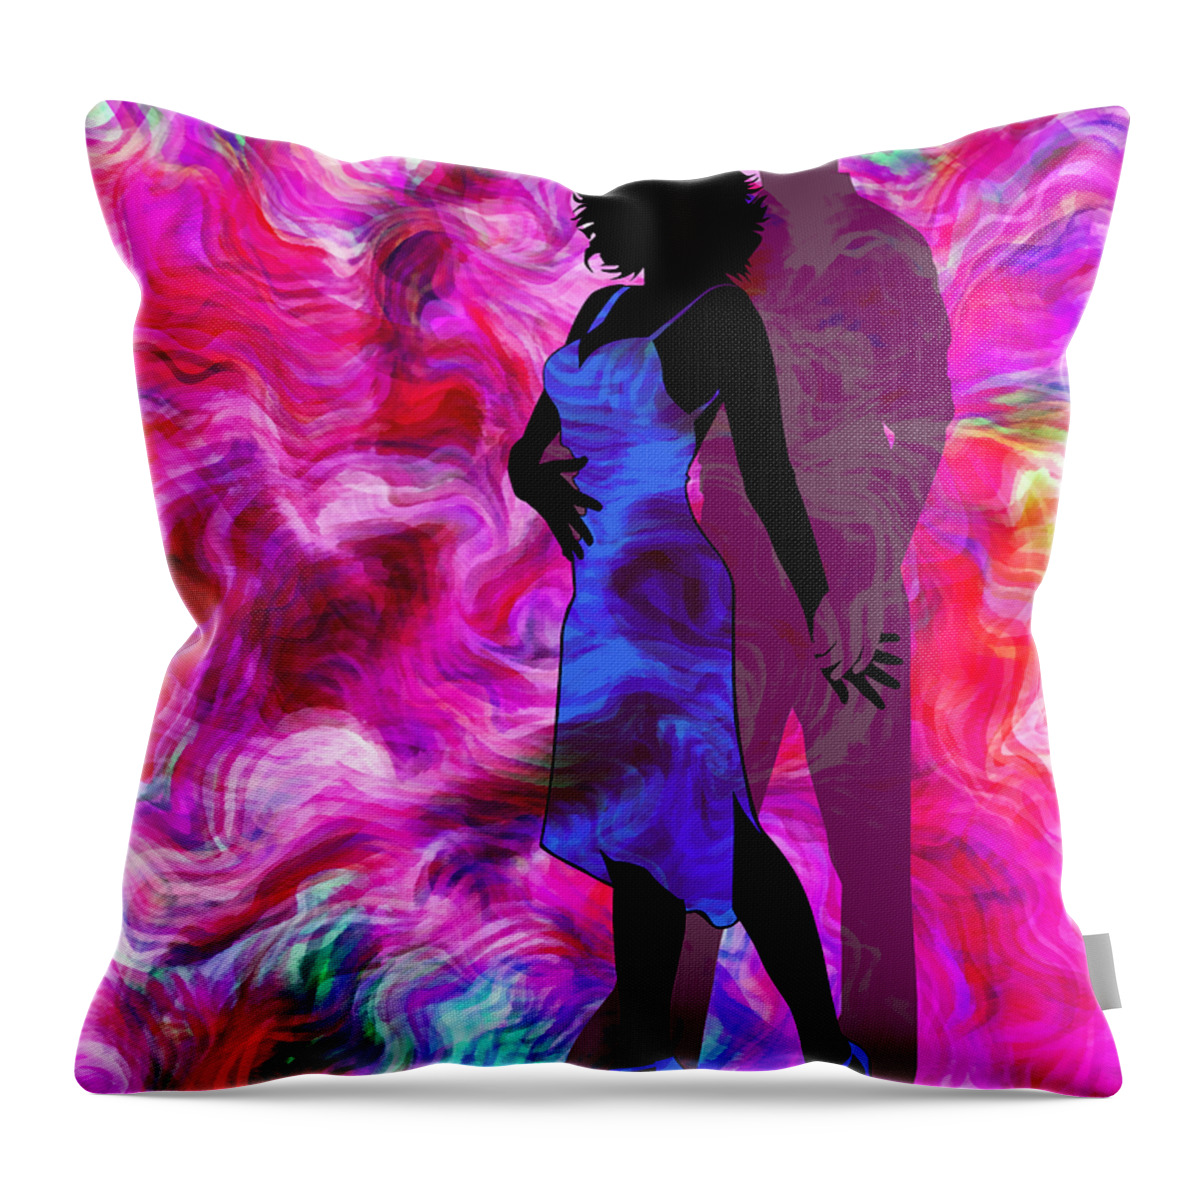 Abstract Throw Pillow featuring the mixed media Some Like It Hot 2 Part 2 by Angelina Tamez